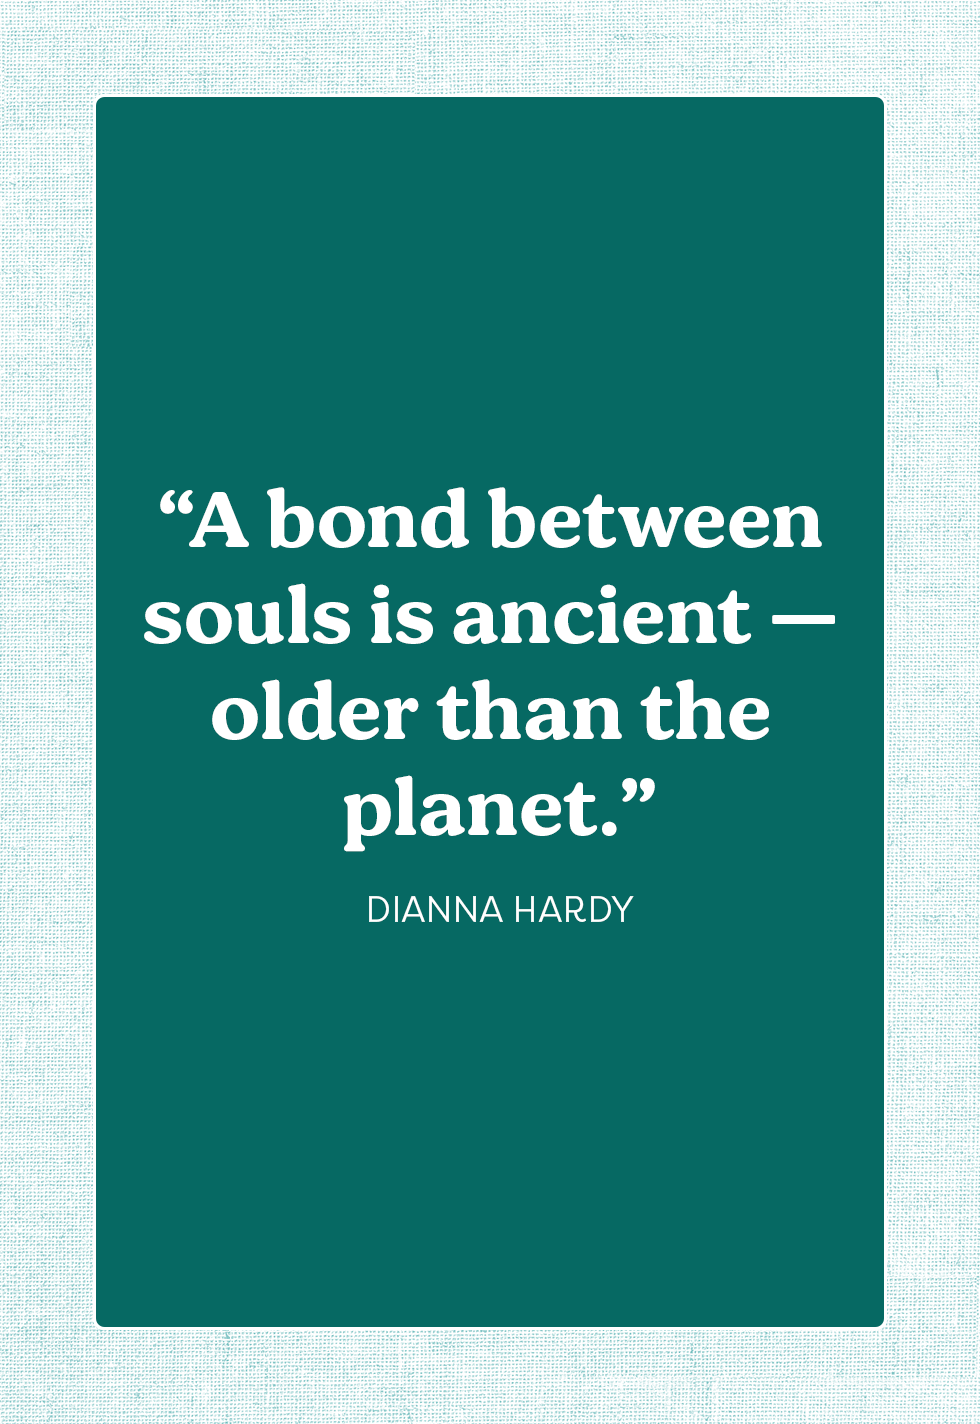 Deep Quotes About Soulmates: A Bond Between Souls Is Ancient